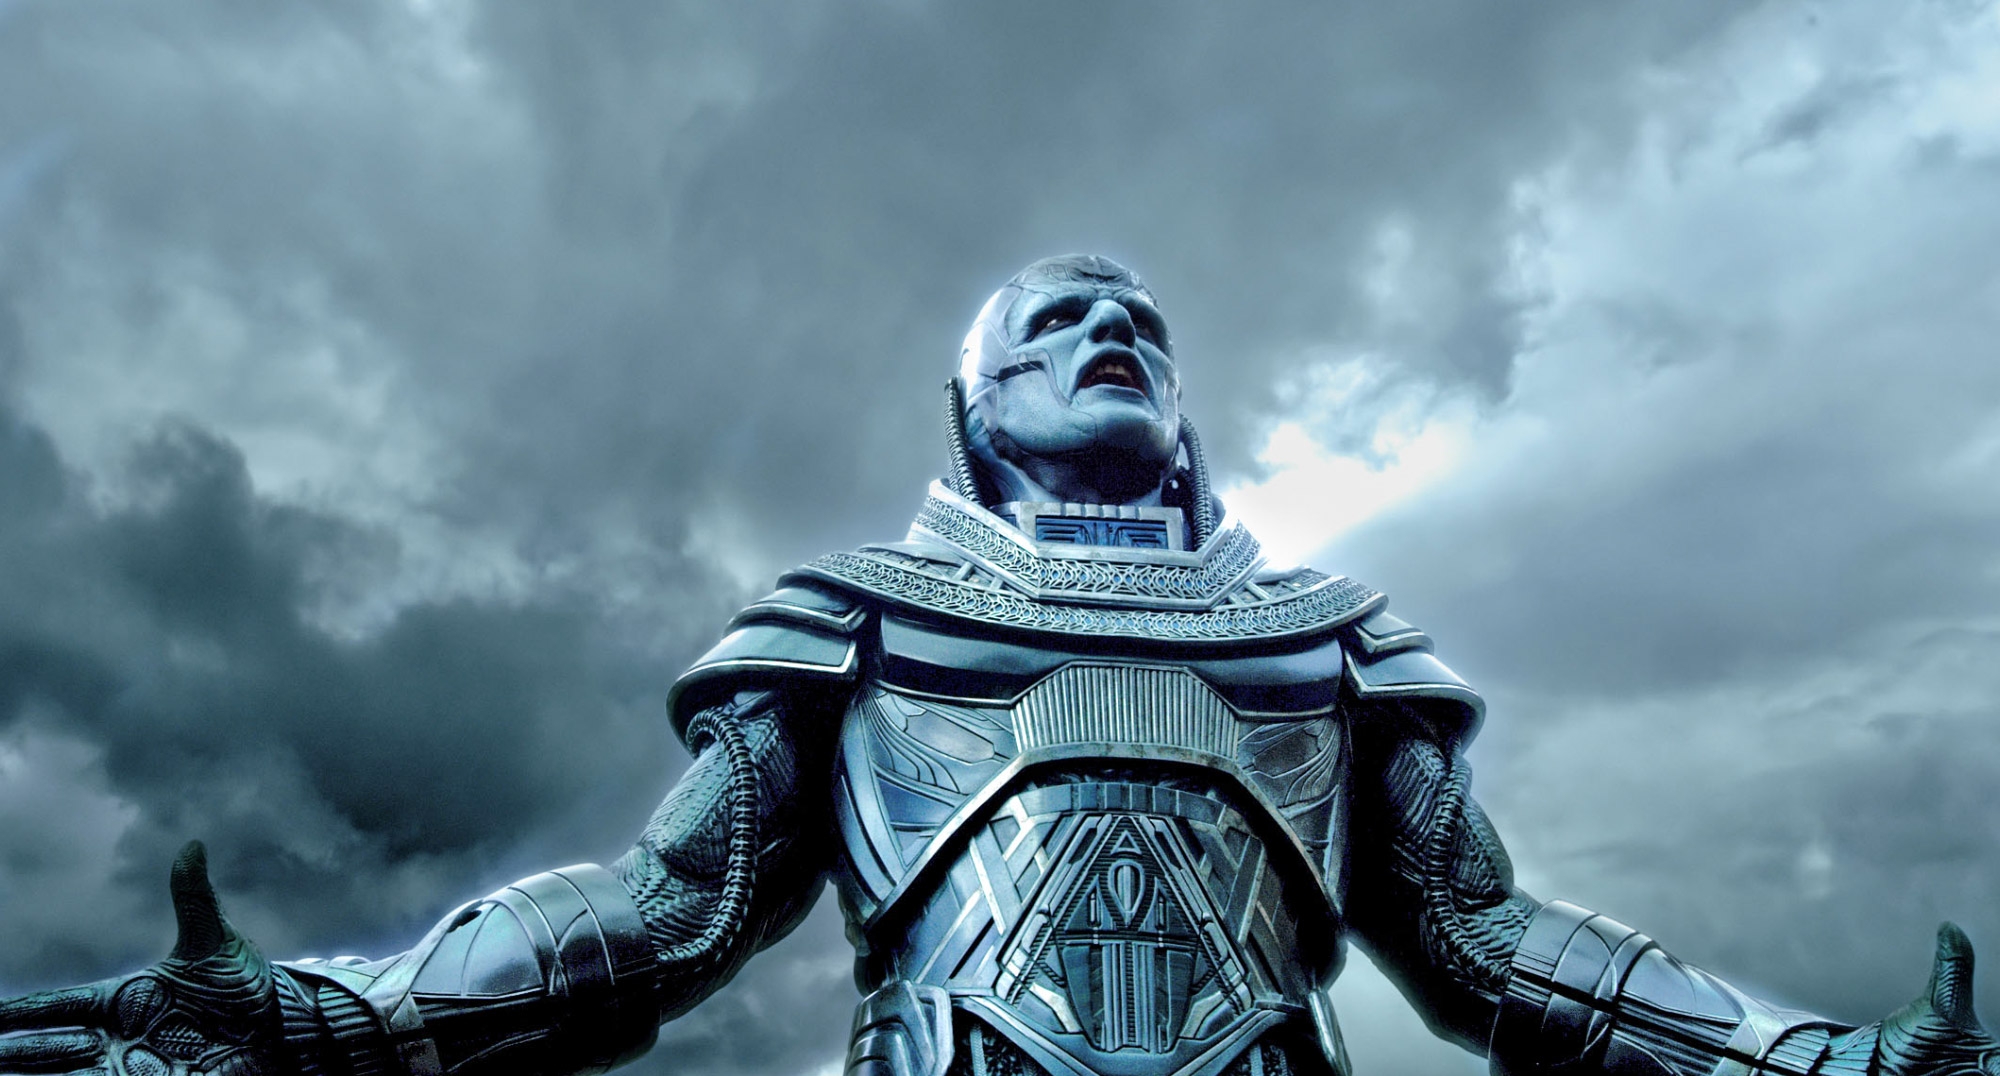 Videophiled: ‘X-Men Apocalypse’ and ‘Ghostbusters’ 2016